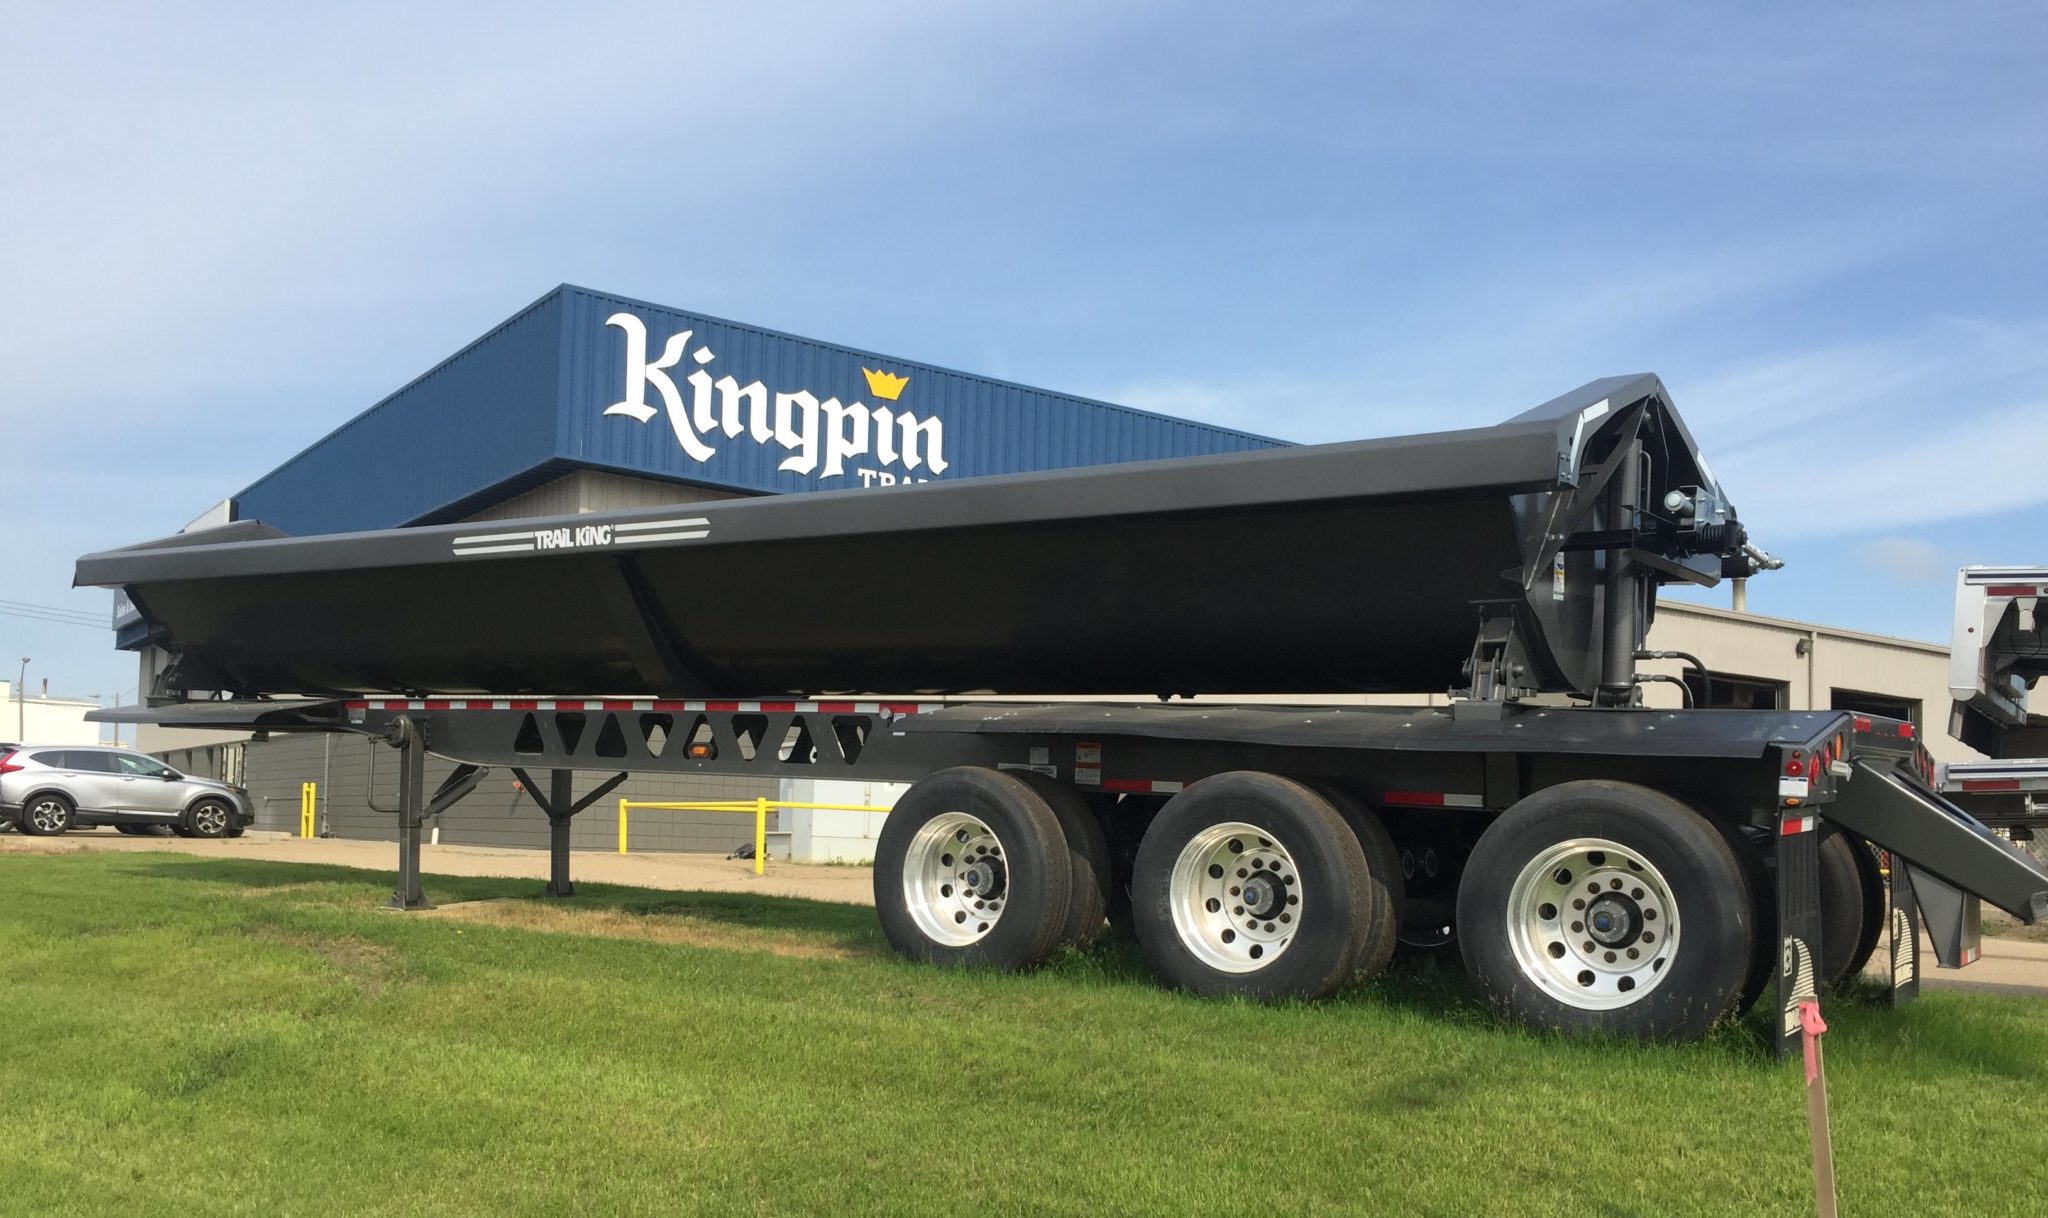 Side and End Dump Trailers: Know The Differences That Matter